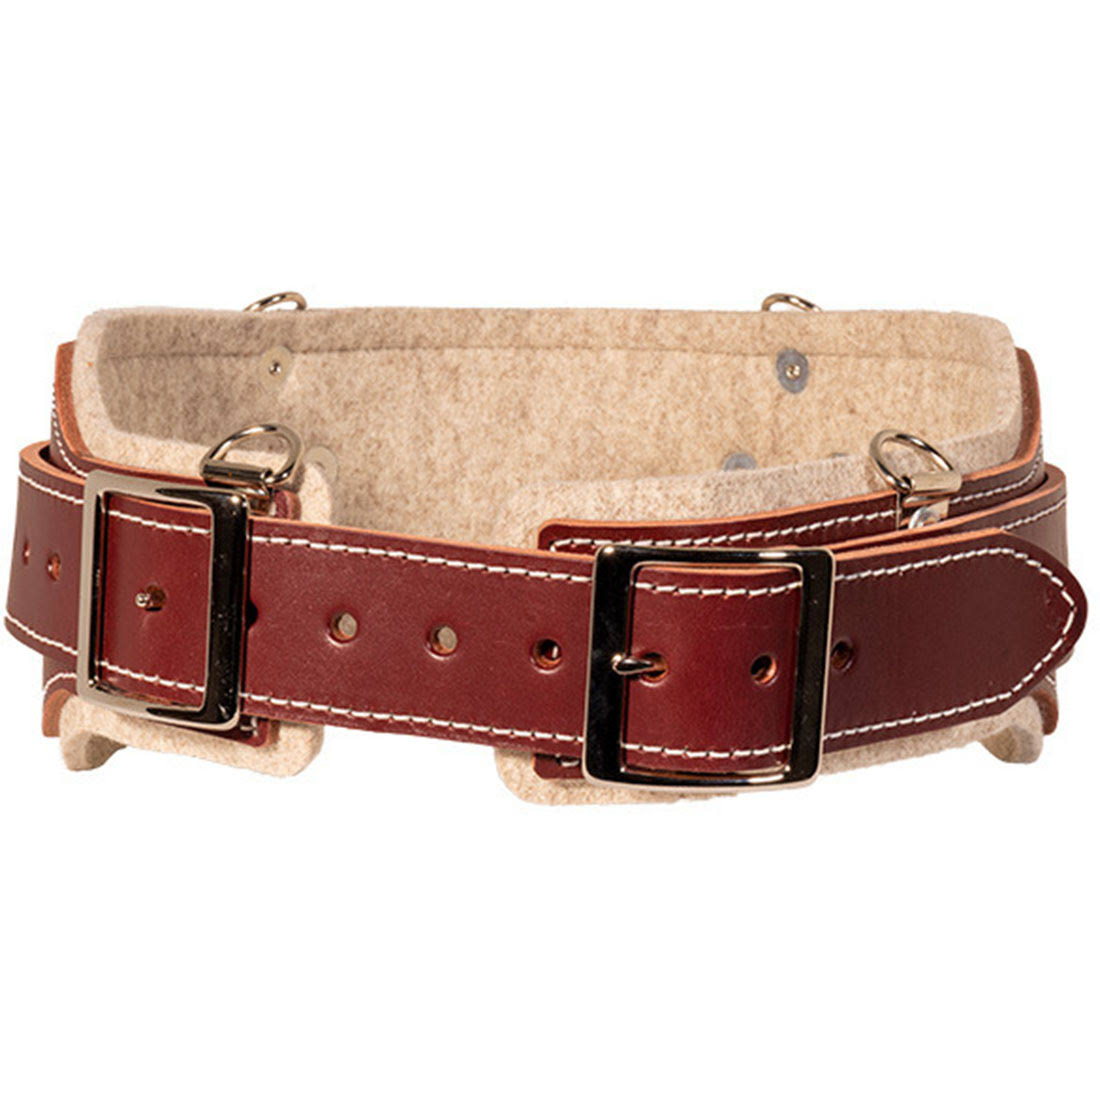 Black Smooth Leather Belt with Square Buckle 5055